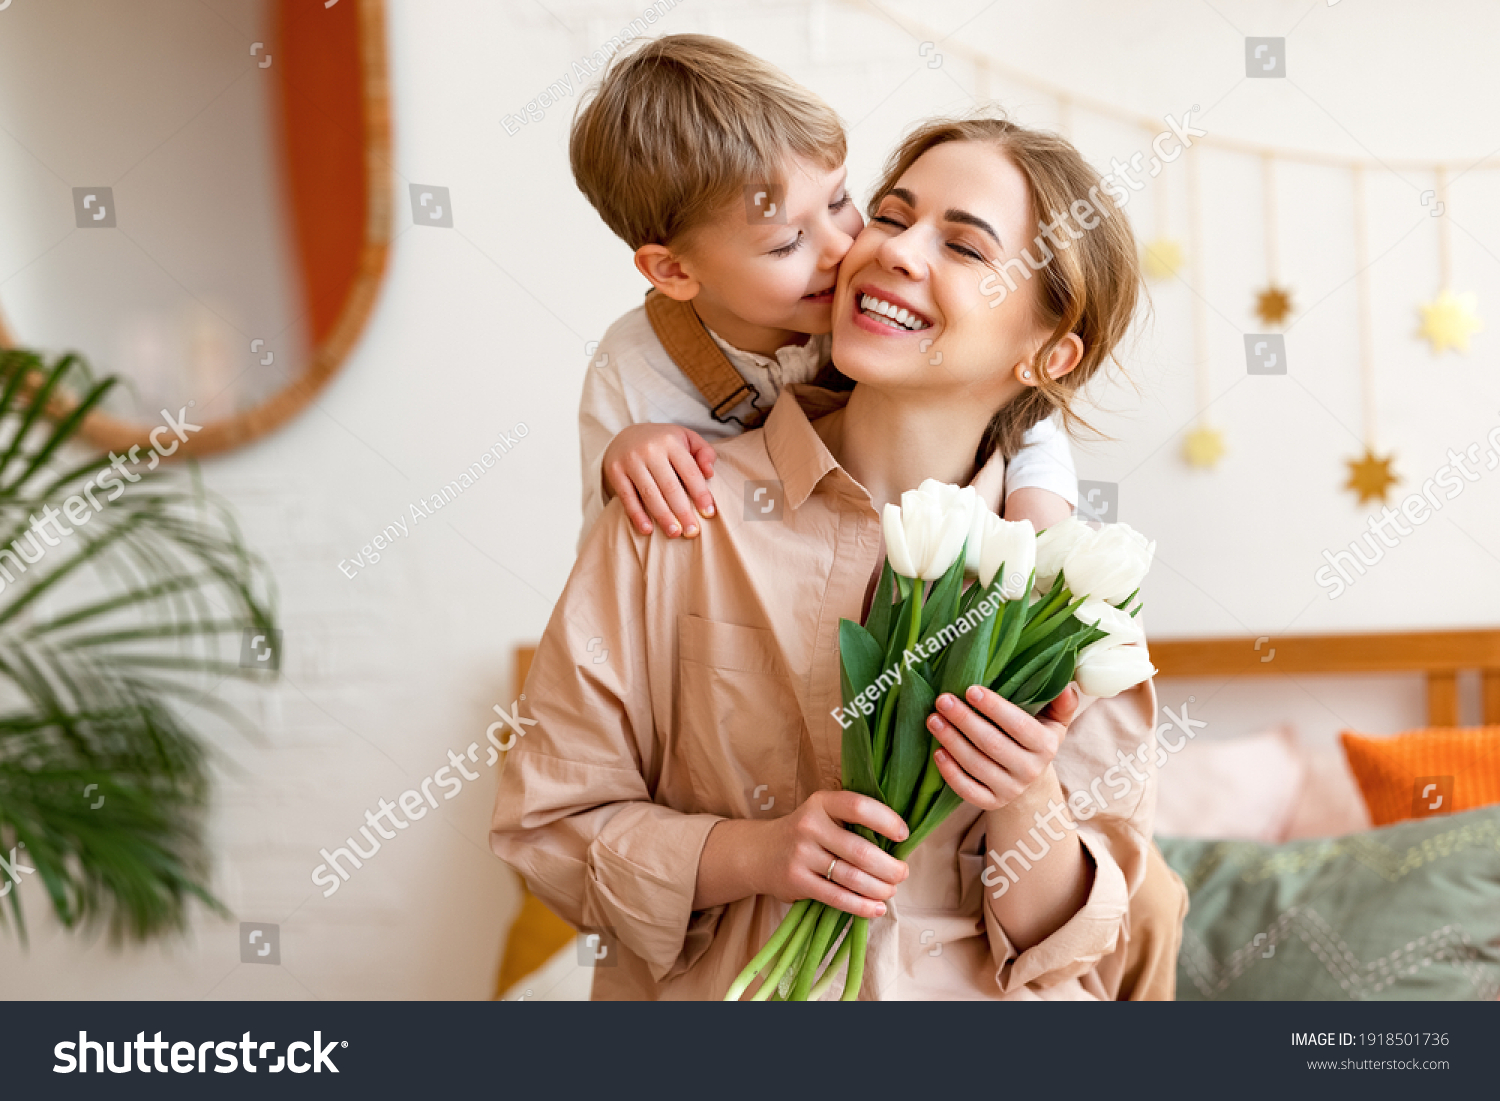 tender son kisses the happy mother and gives her a bouquet of tulips, congratulating her on mother's day during holiday celebration at home #1918501736